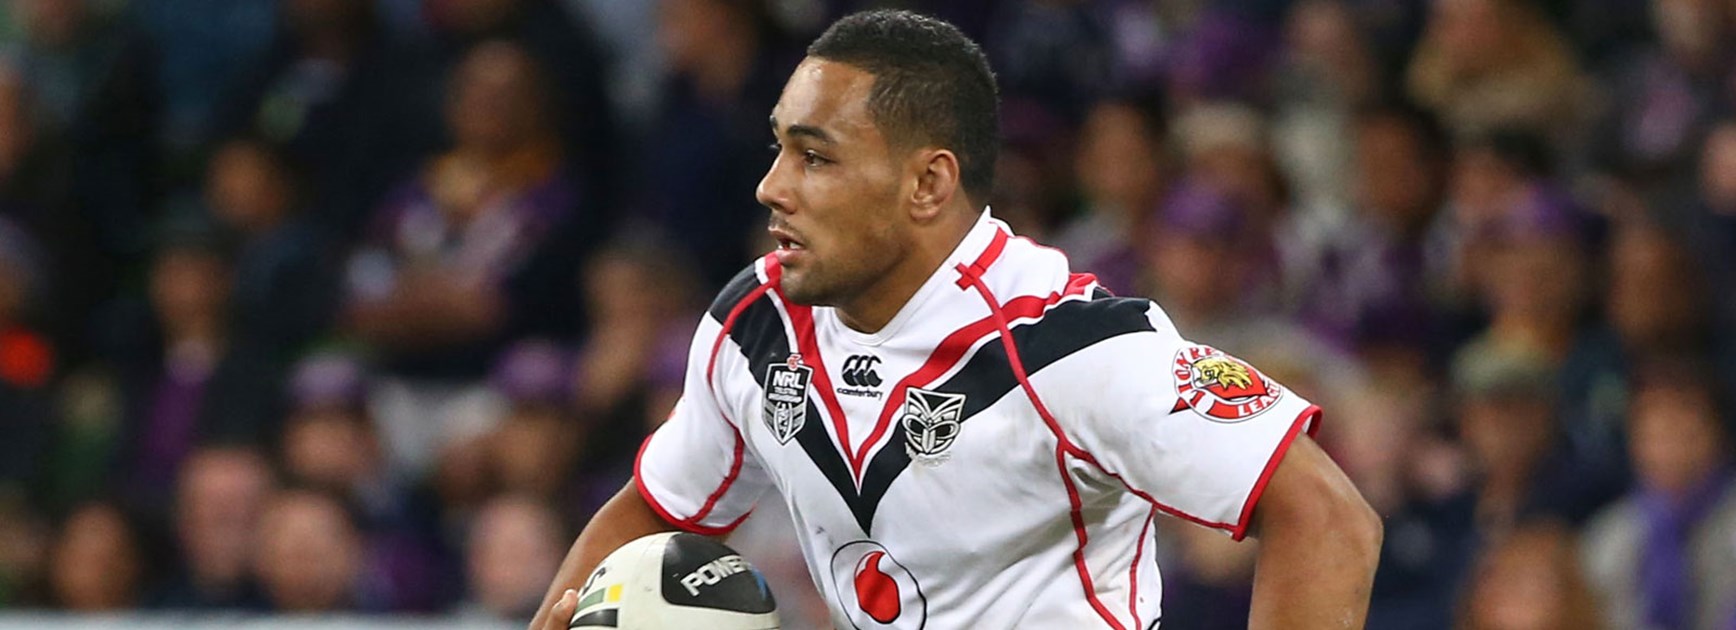 Ngani Laumape will make his return for the Warriors in Round 5 against the Storm.